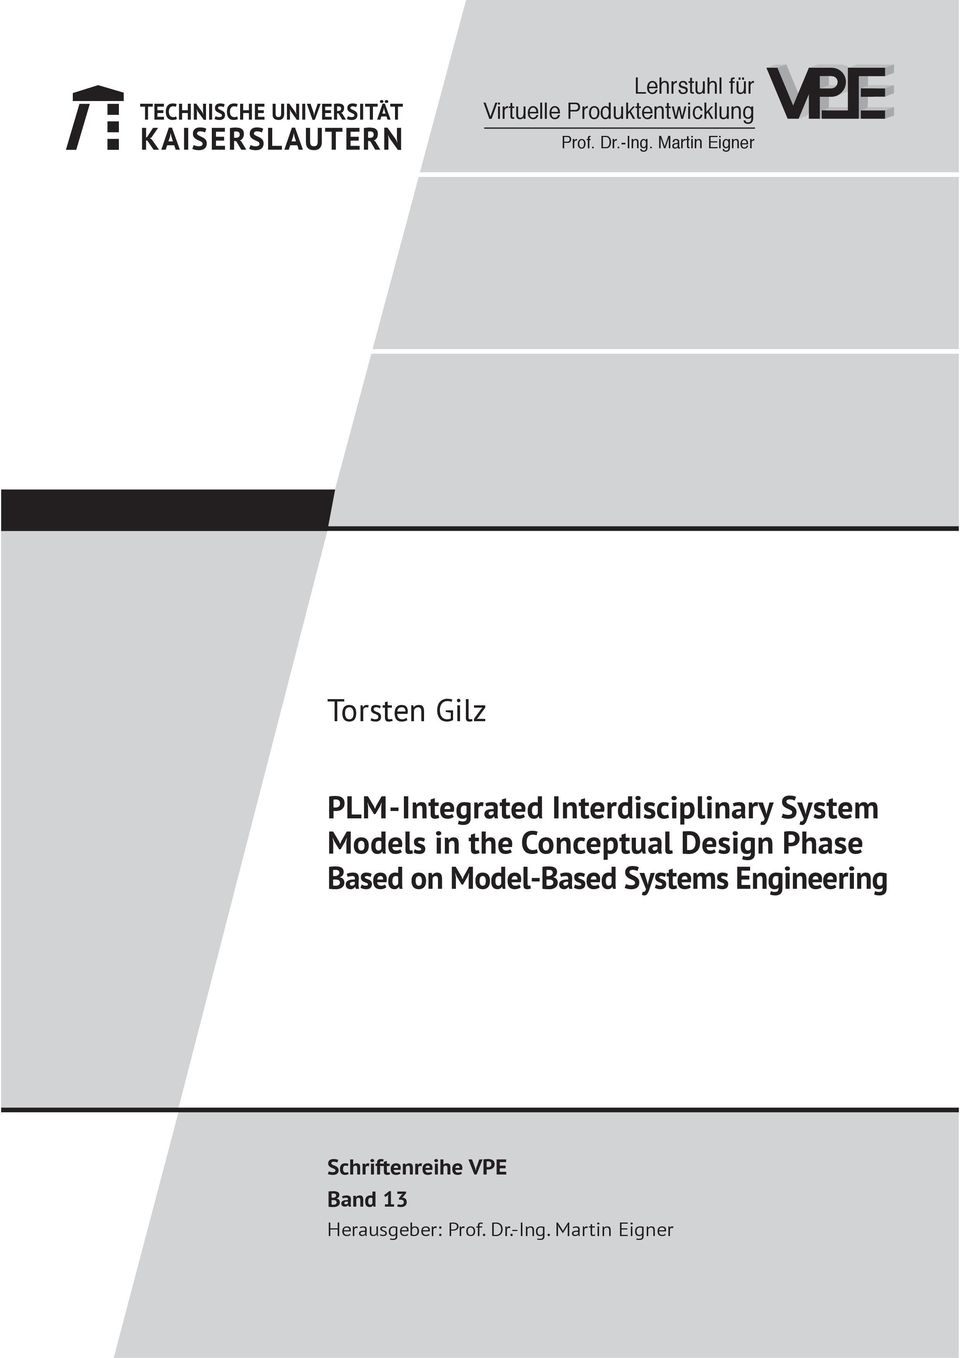 Models in the Conceptual Design Phase Based on Model-Based Systems